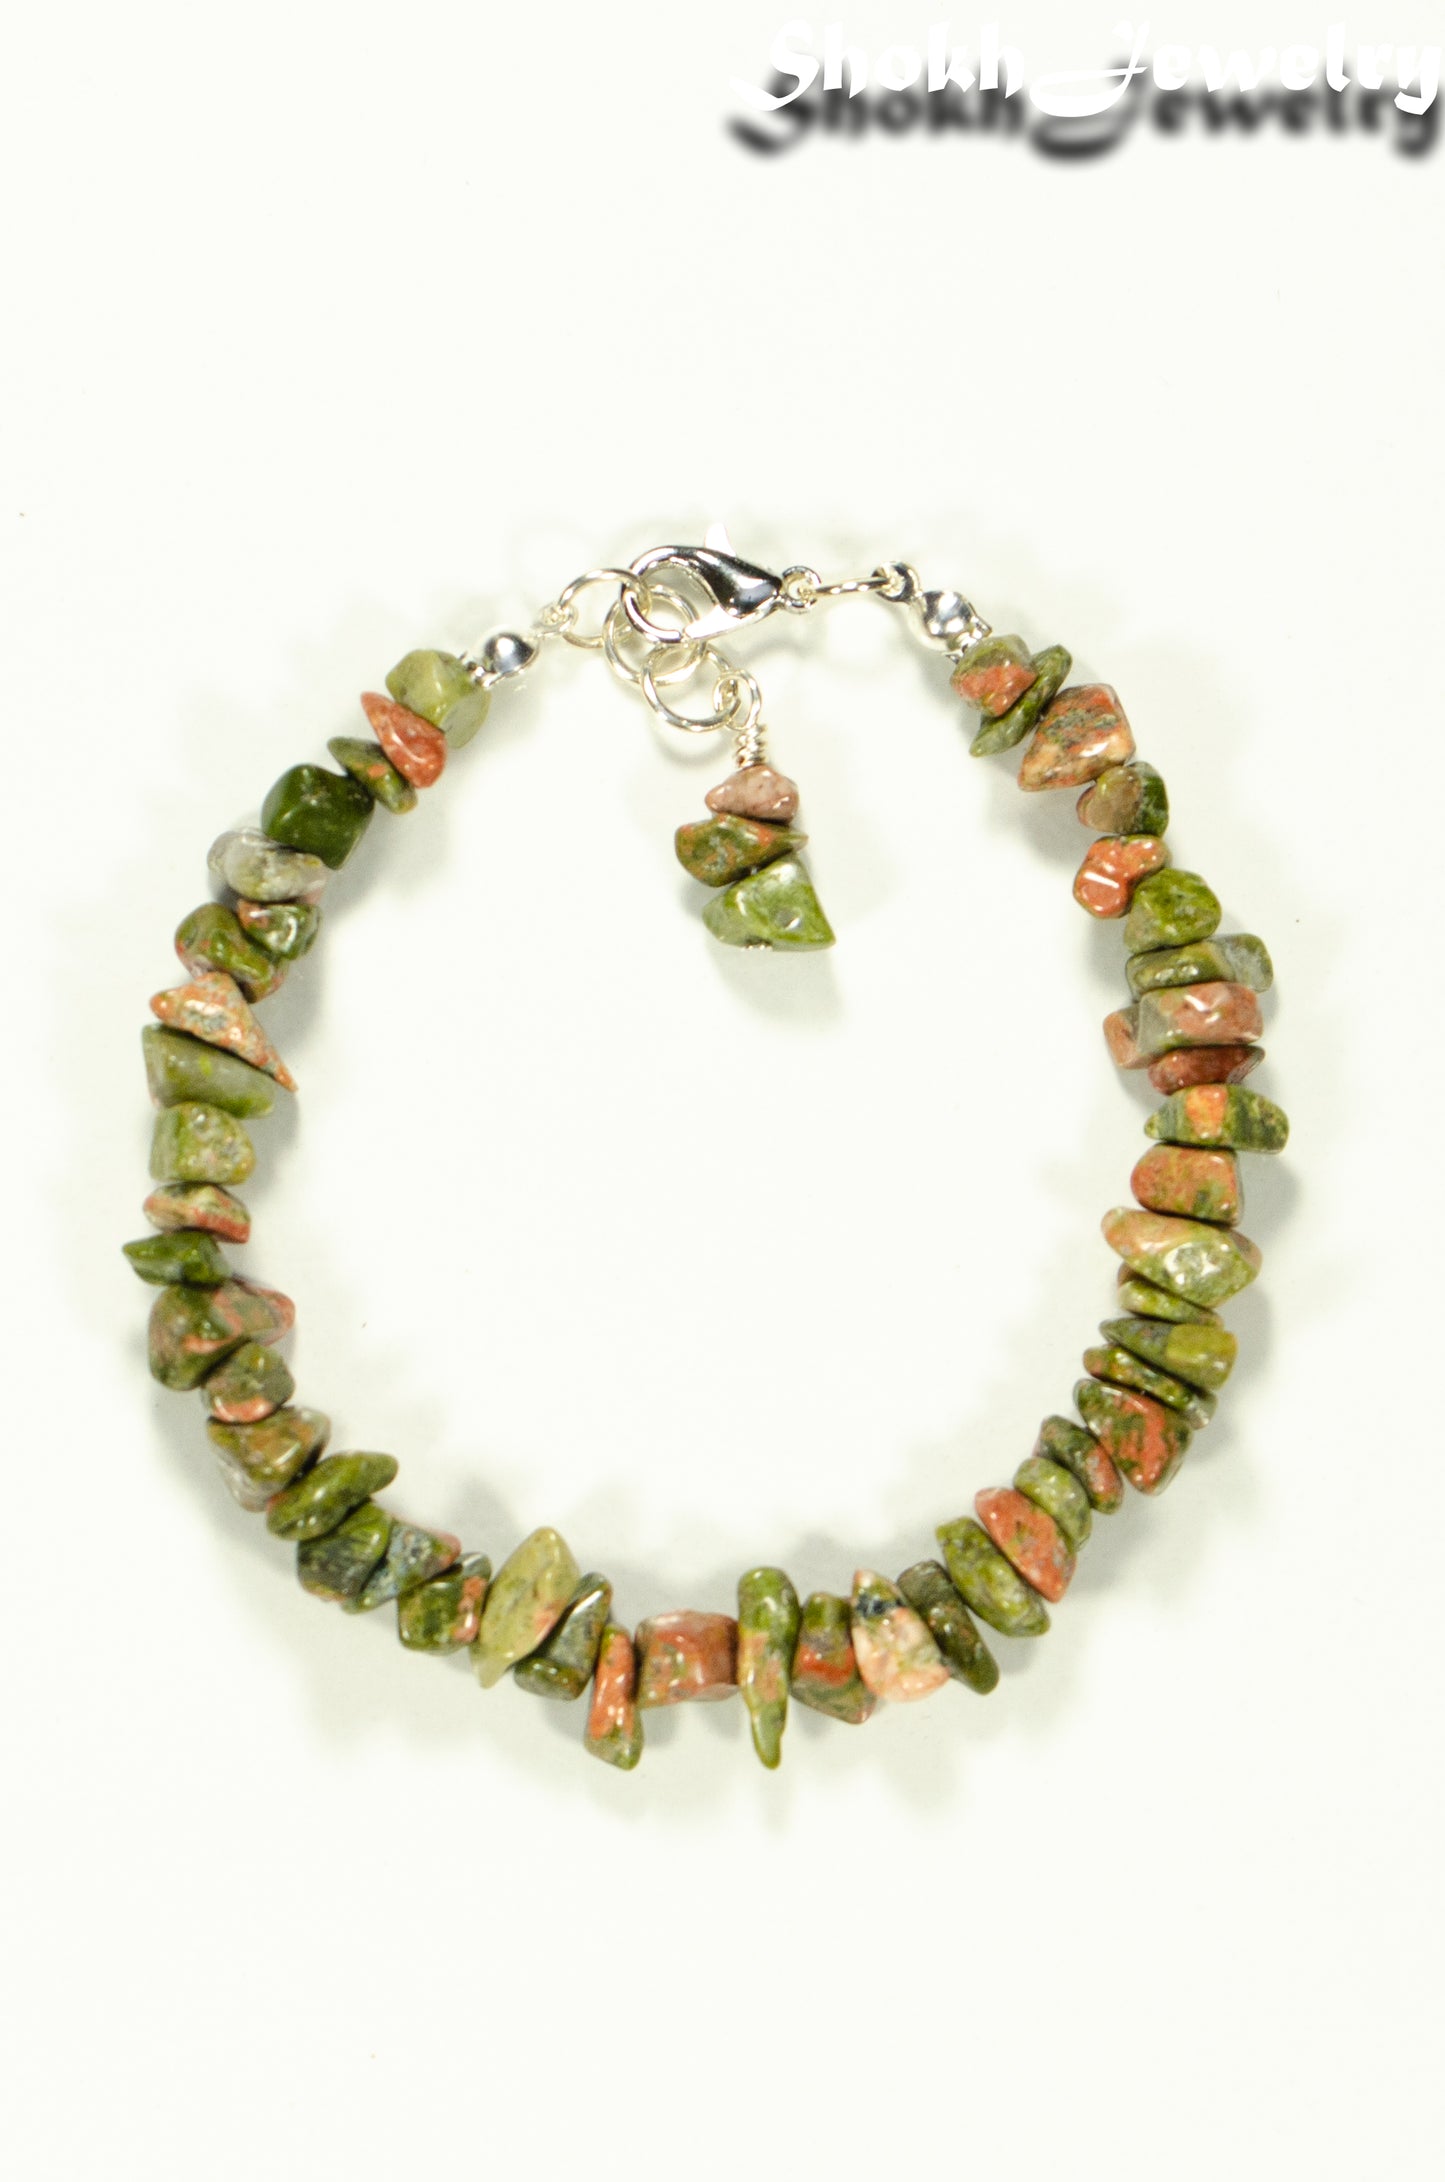 Natural Unakite Crystal Chip Bracelet with lobster claw clasp.